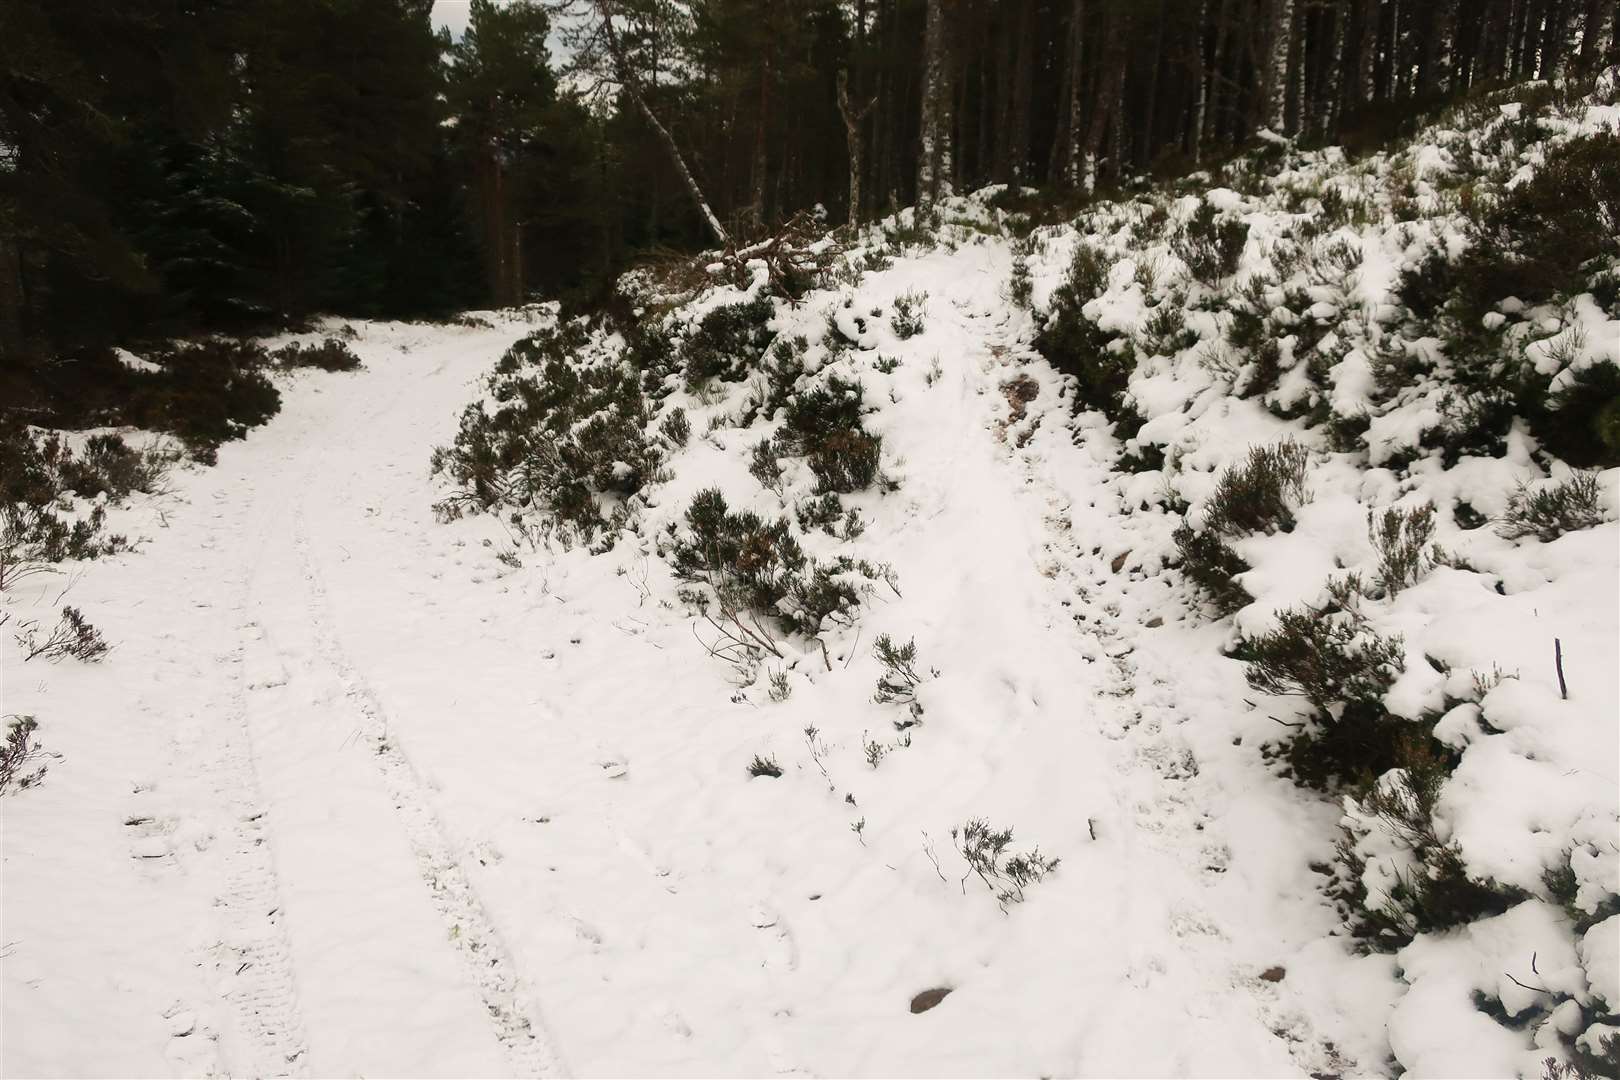 The path that leads to the monument on Creag Ruadh.